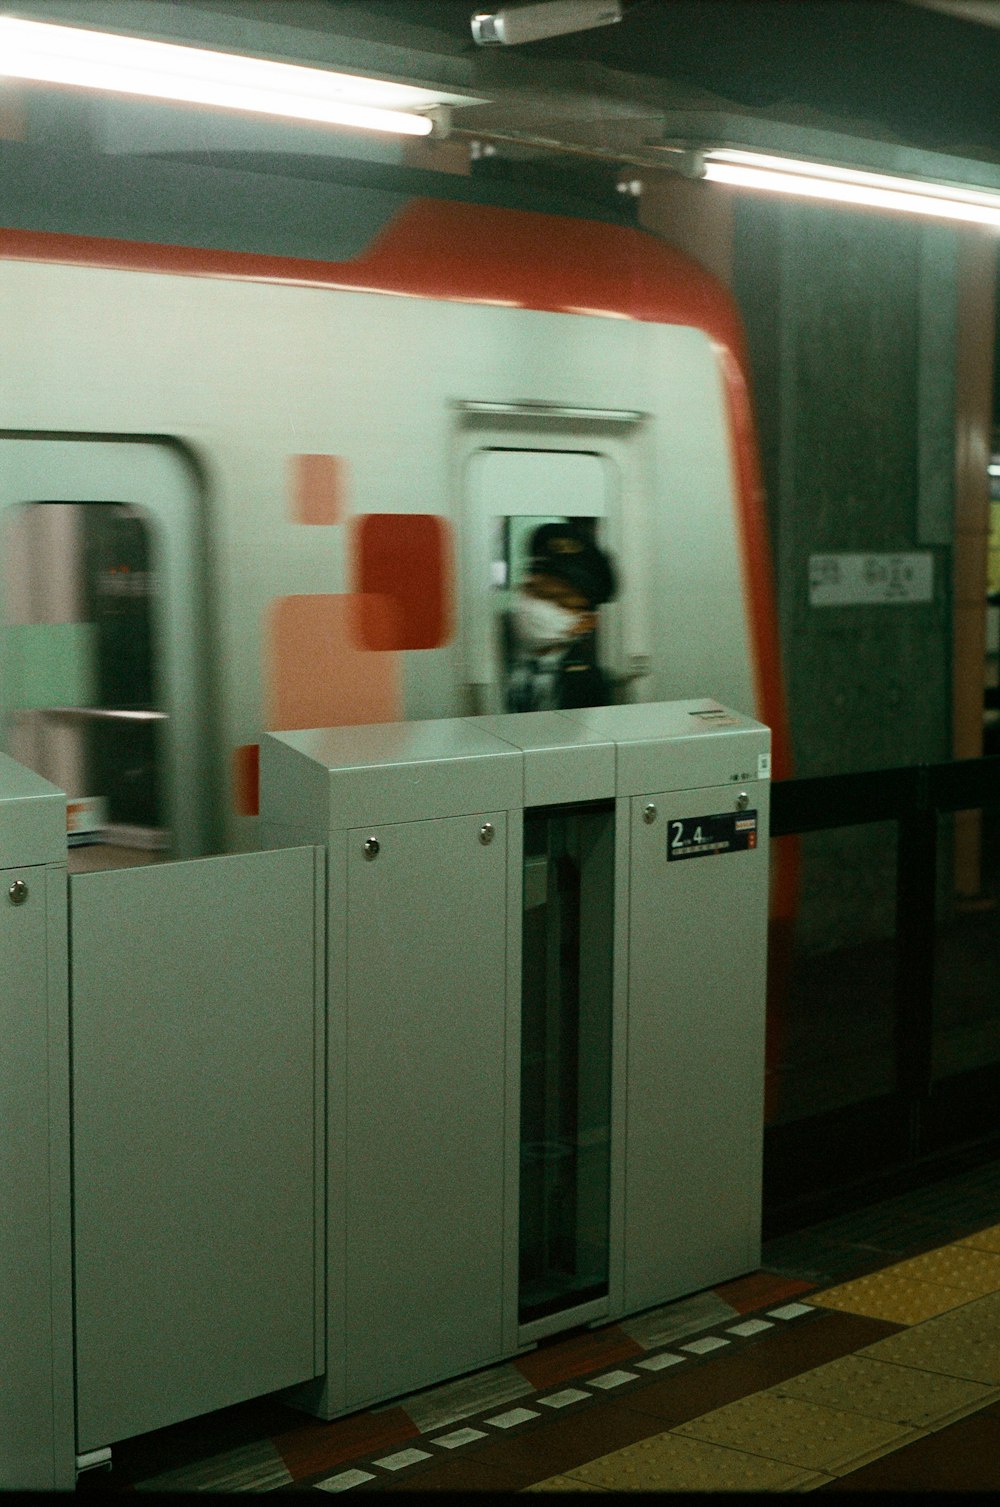 a subway train is moving through the station